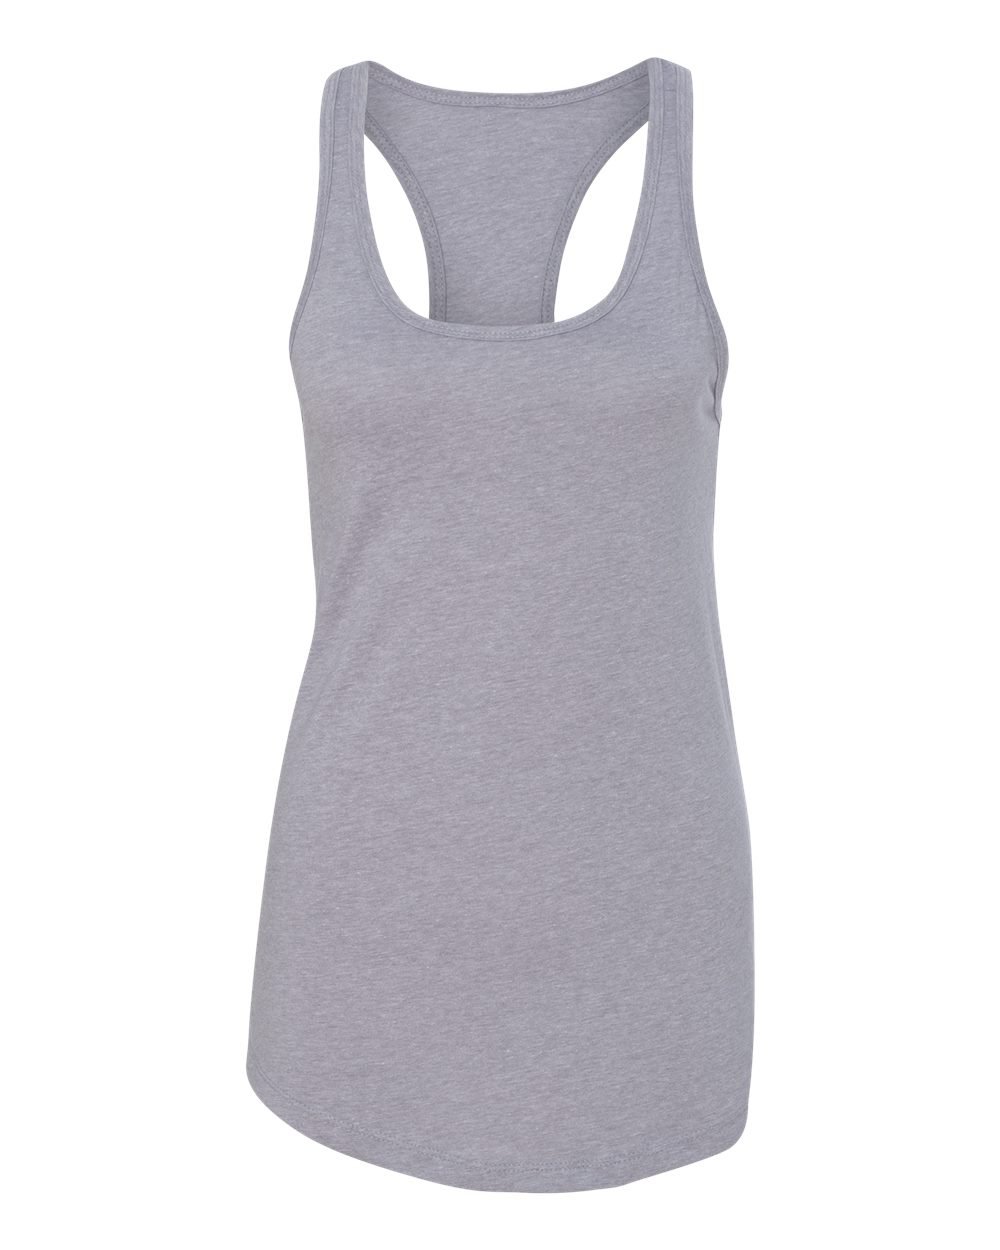 Next Level Ideal Racerback Tank Heather Gray Small (Pack of 5)